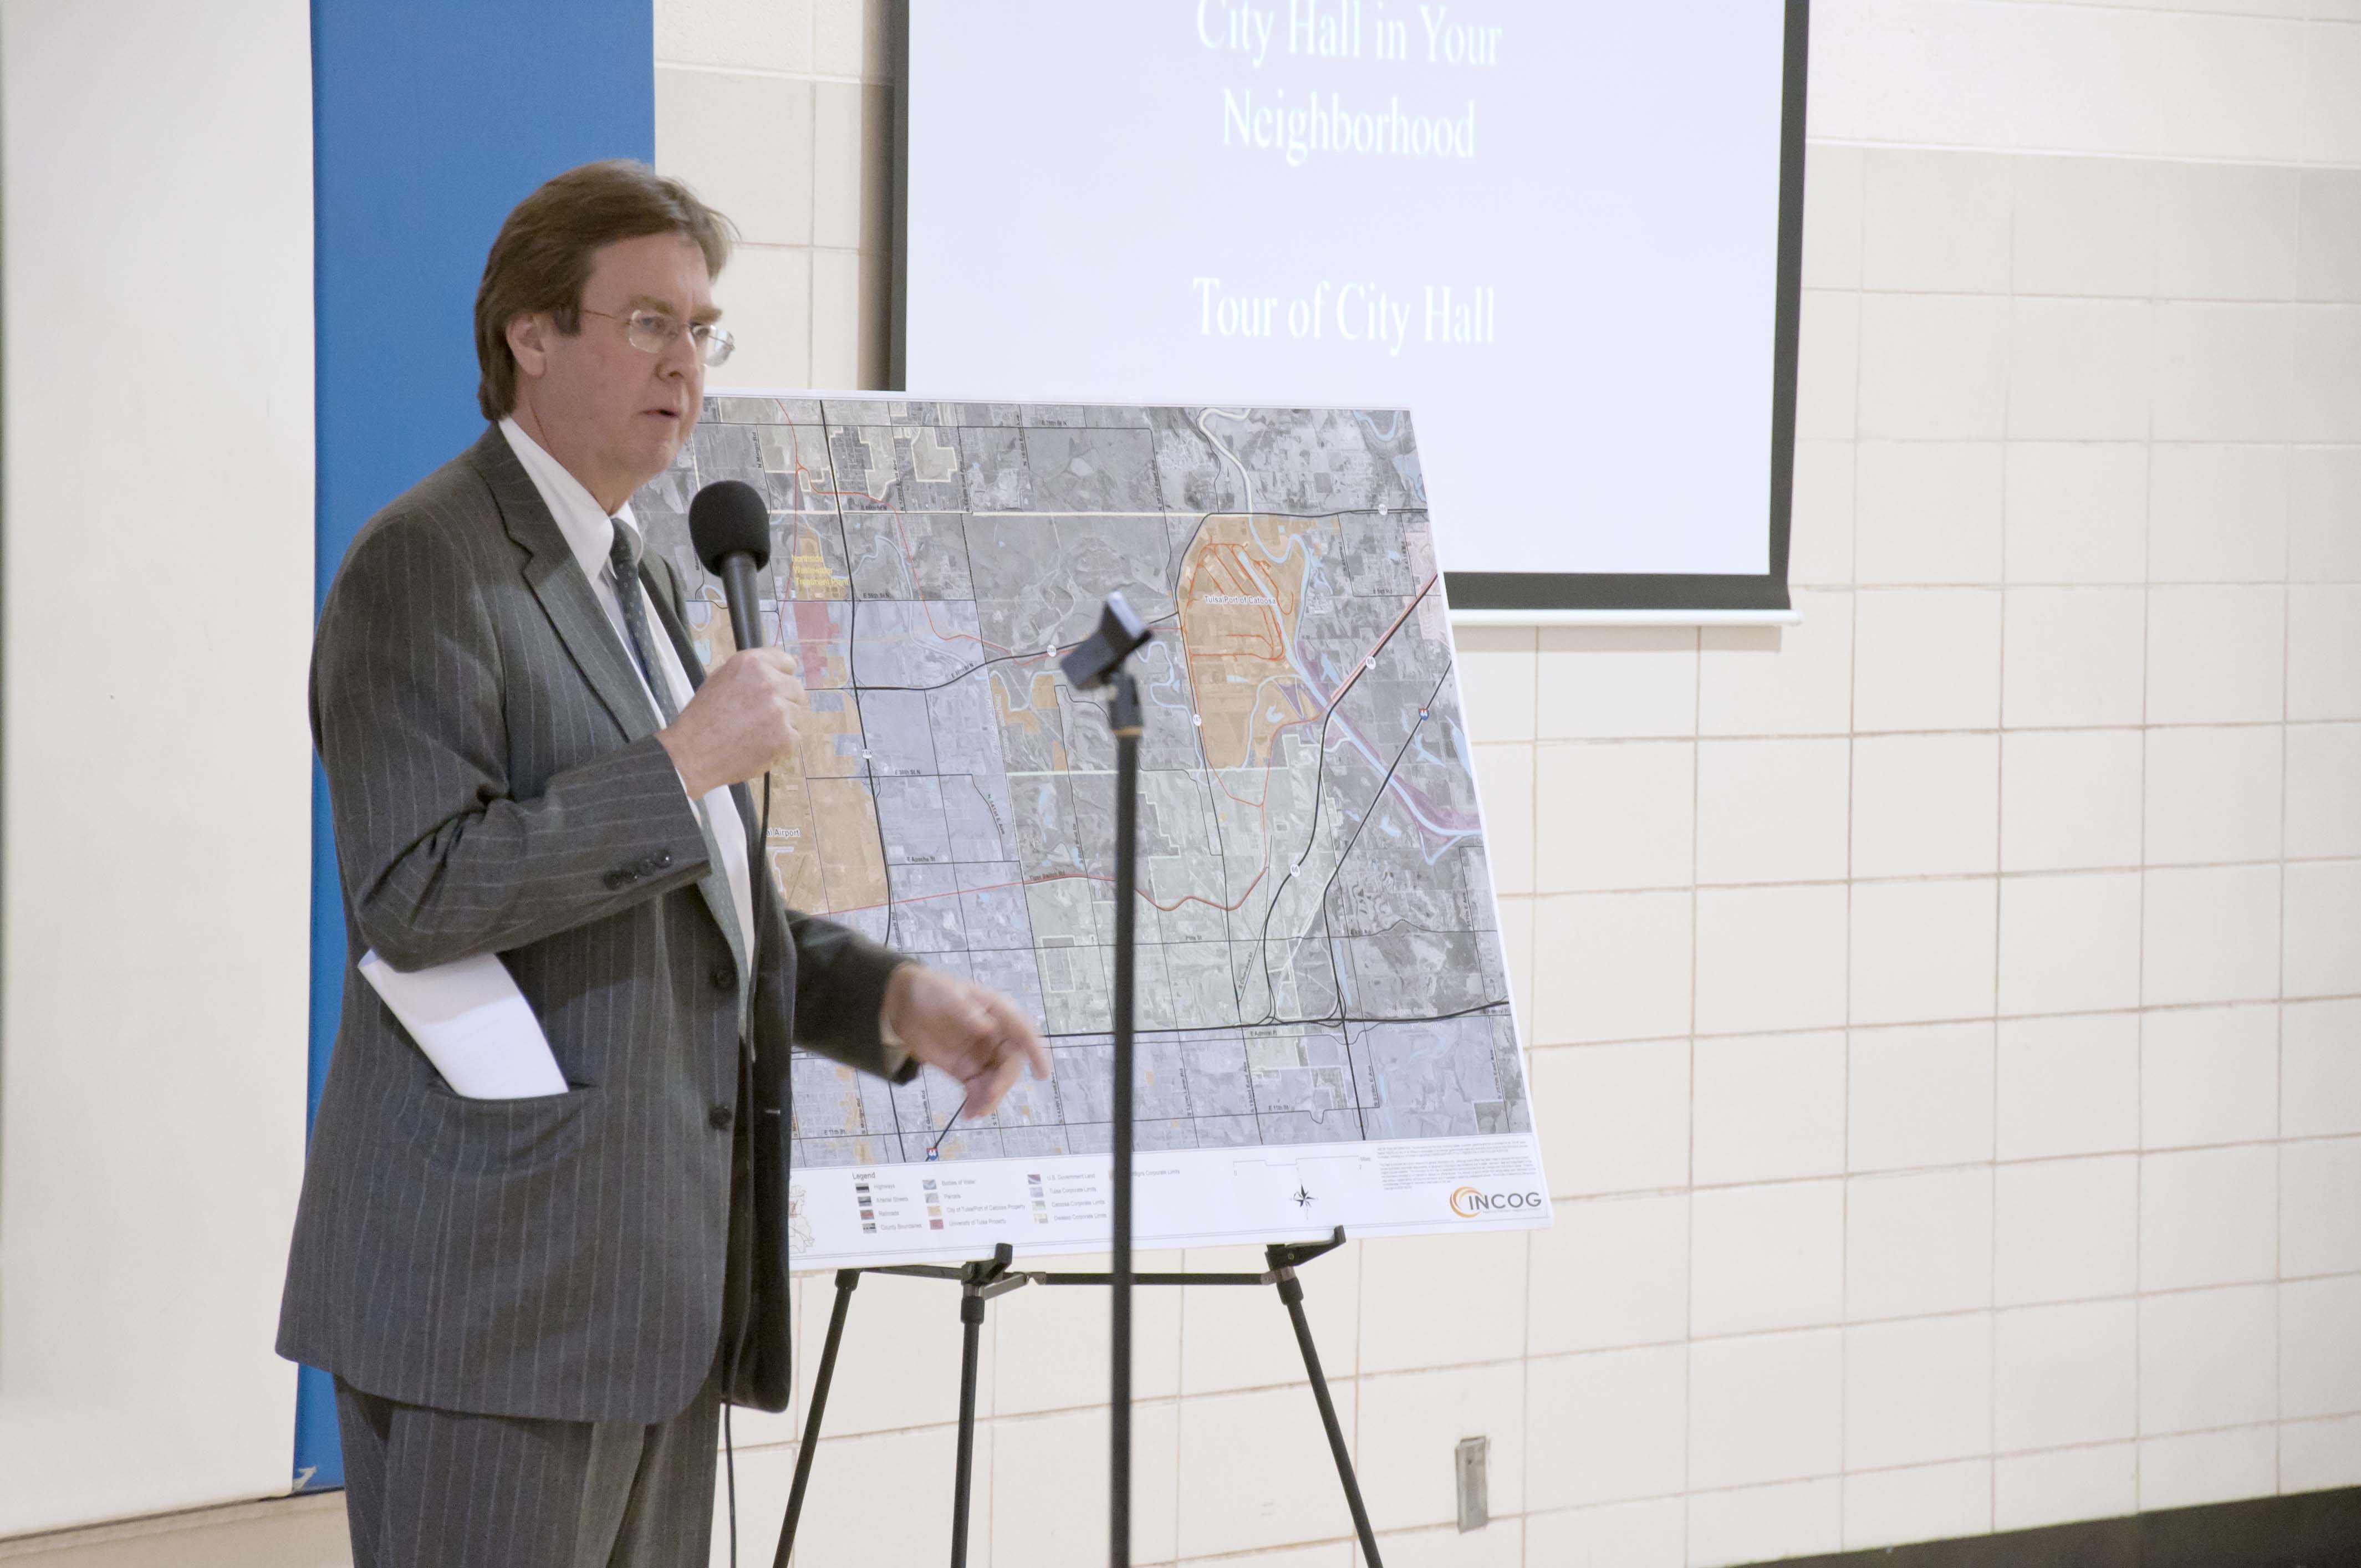 Capital Improvements Meetings Continue: Meeting Tonight at Whiteside Park Community Center